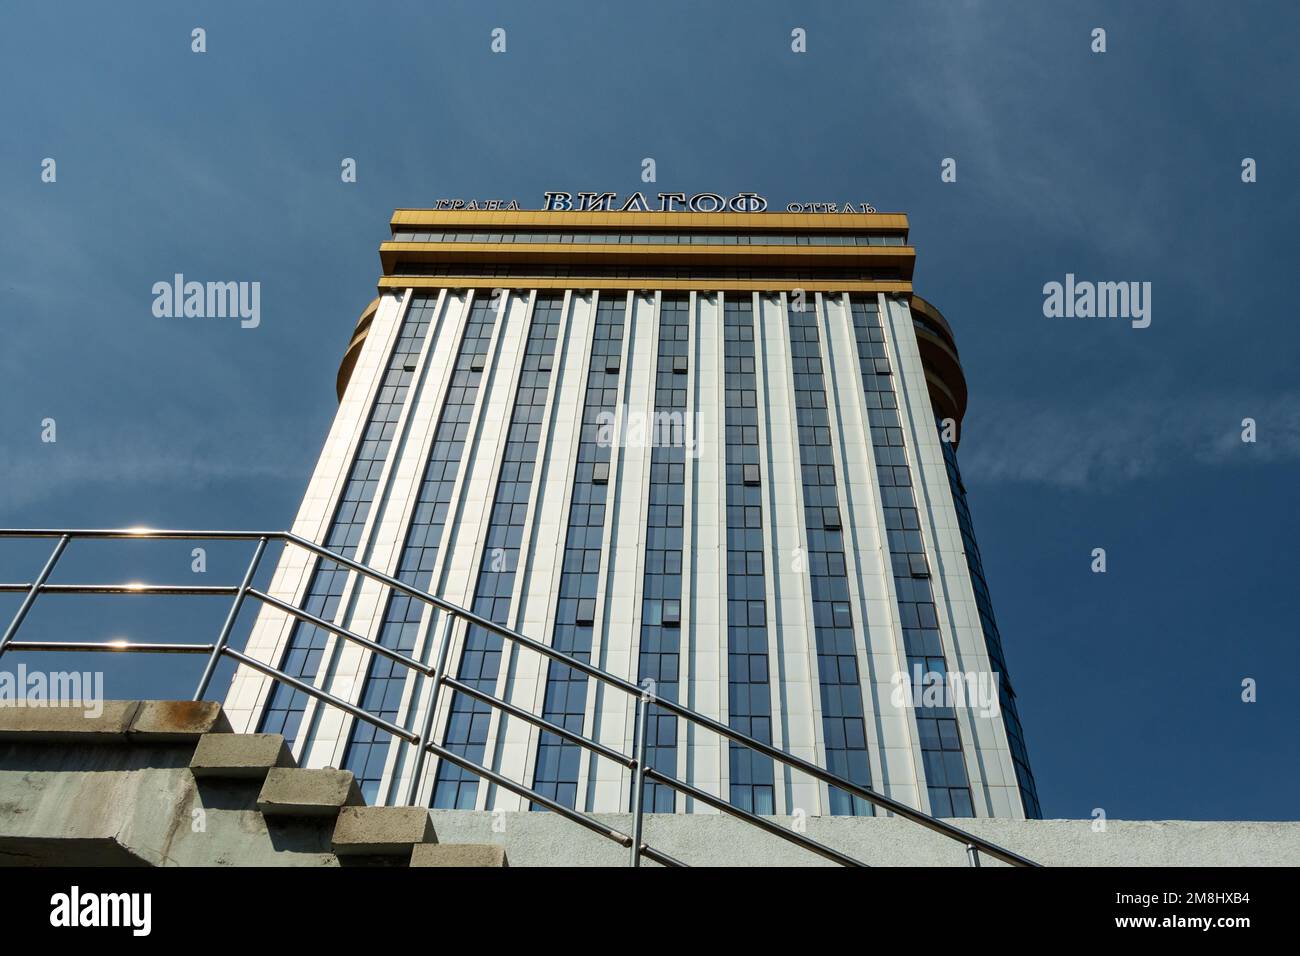 Chelyabinsk, Russia - July 24, 2022. View from the bottom of a high-rise hotel building. Inscription on the back roof: Vidgof Hotel. Stock Photo